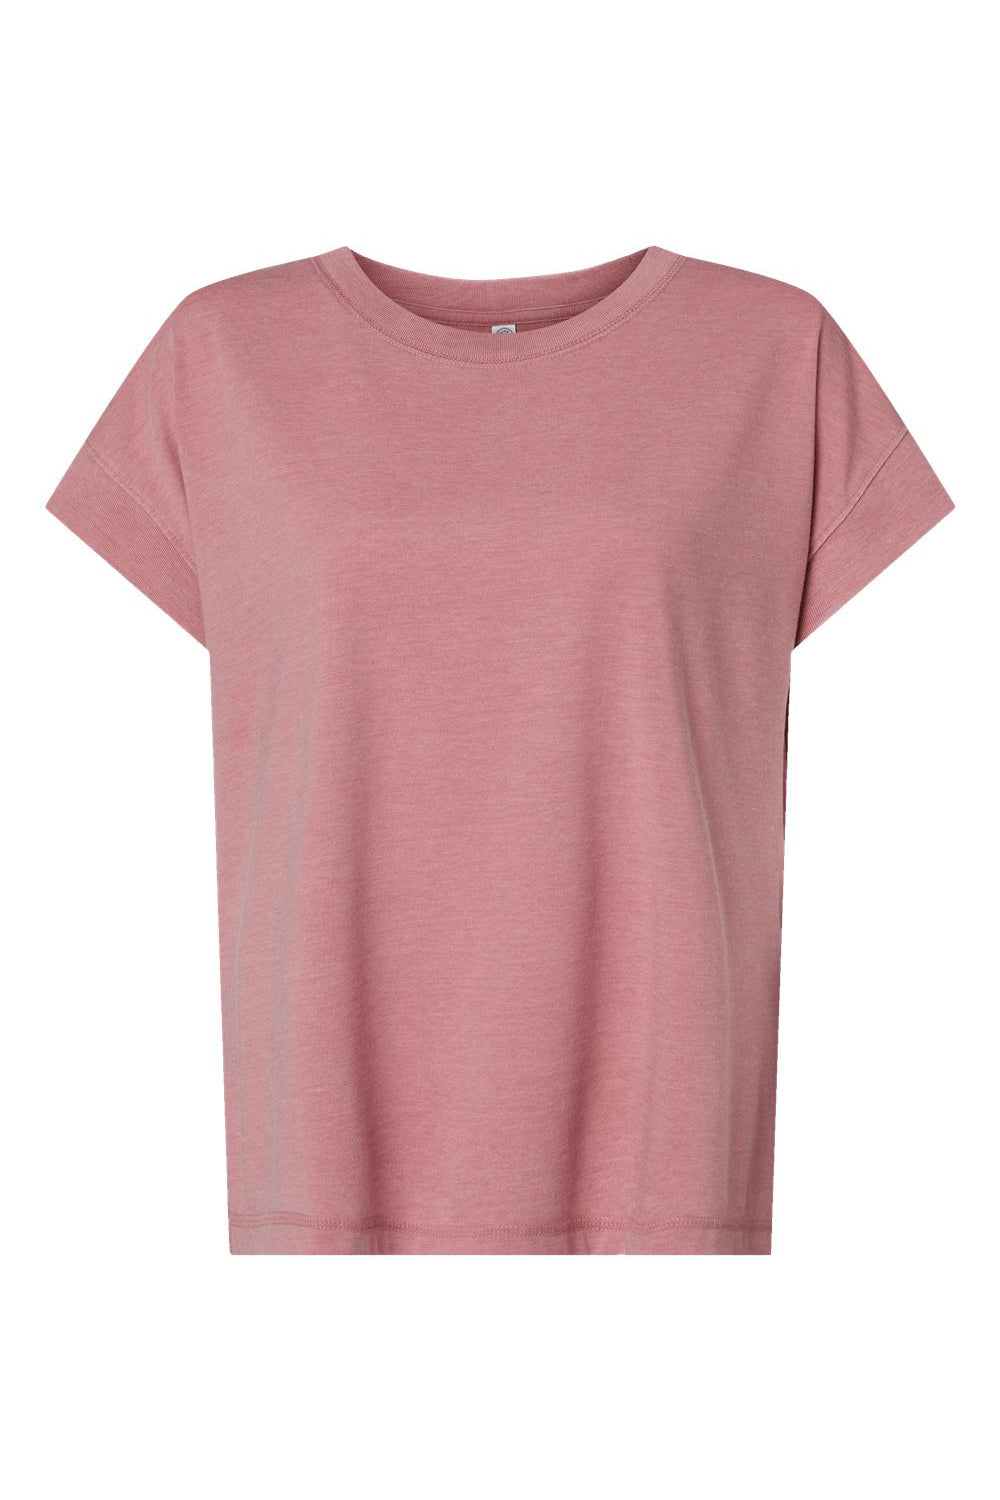 LAT 3502 Womens Relaxed Vintage Wash Short Sleeve Crewneck T-Shirt Mauvelous Pink Flat Front